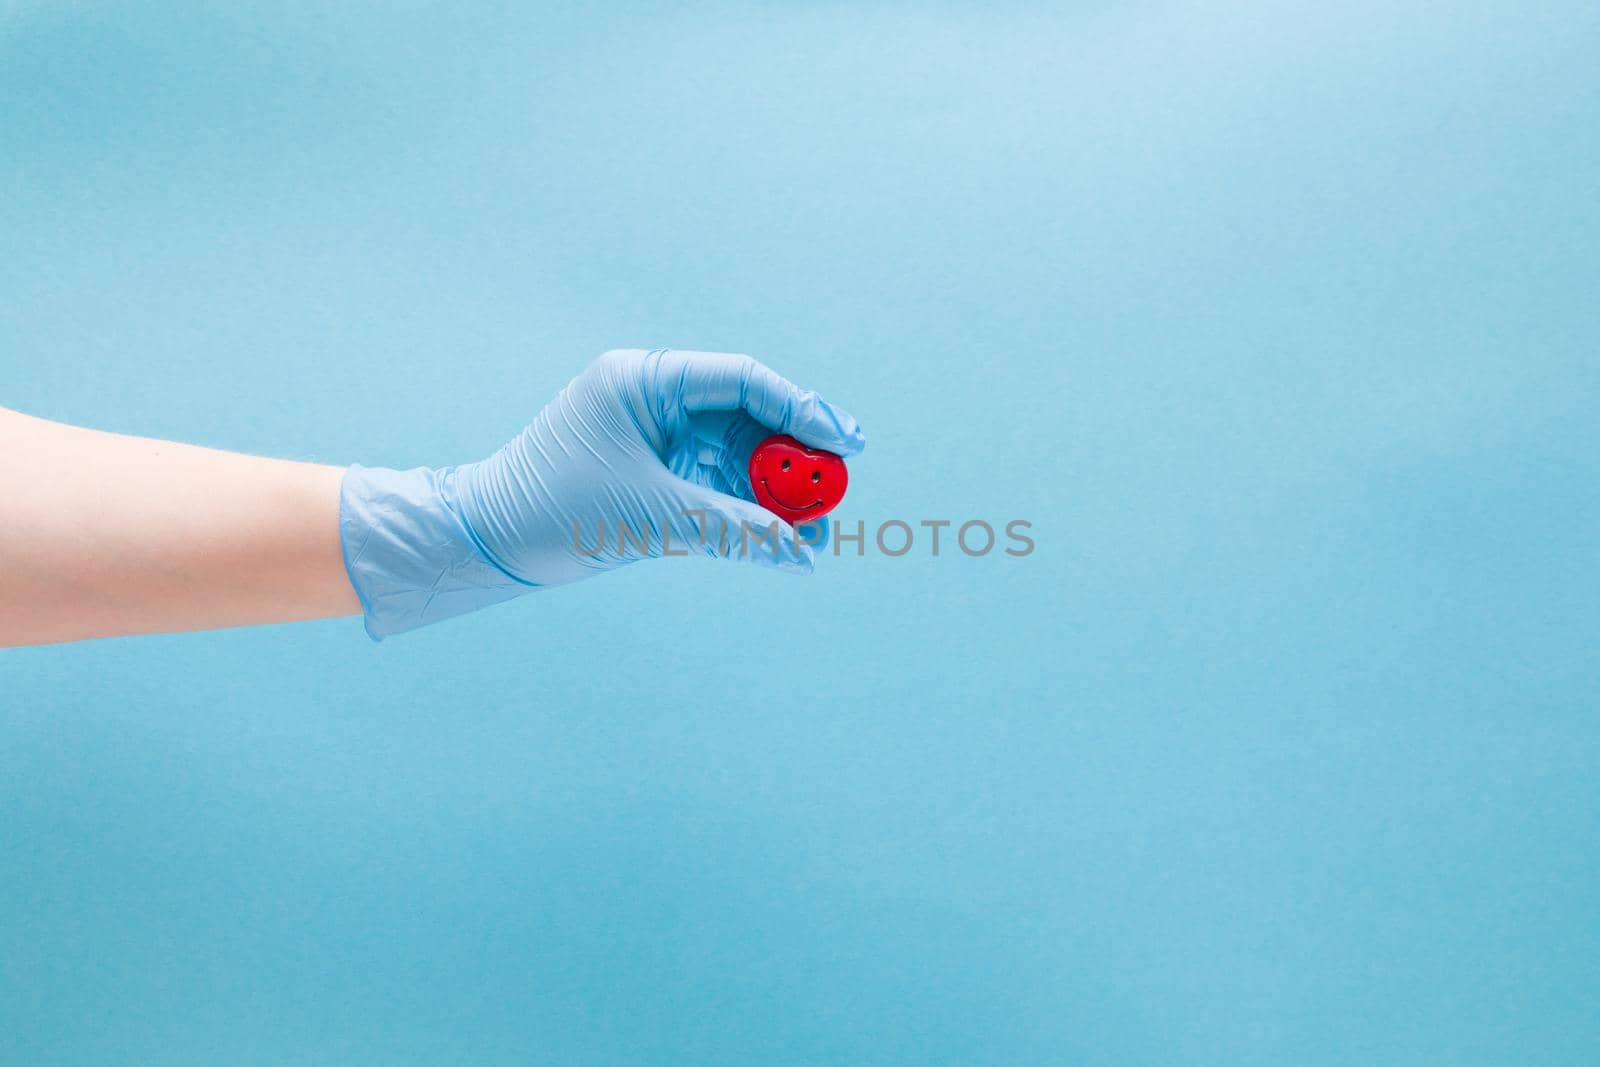 female hand in blue disposable medical glove holds a small red heart with a smile, smiling heart, health care concept, blue background, copy space, vari cordiologist treats